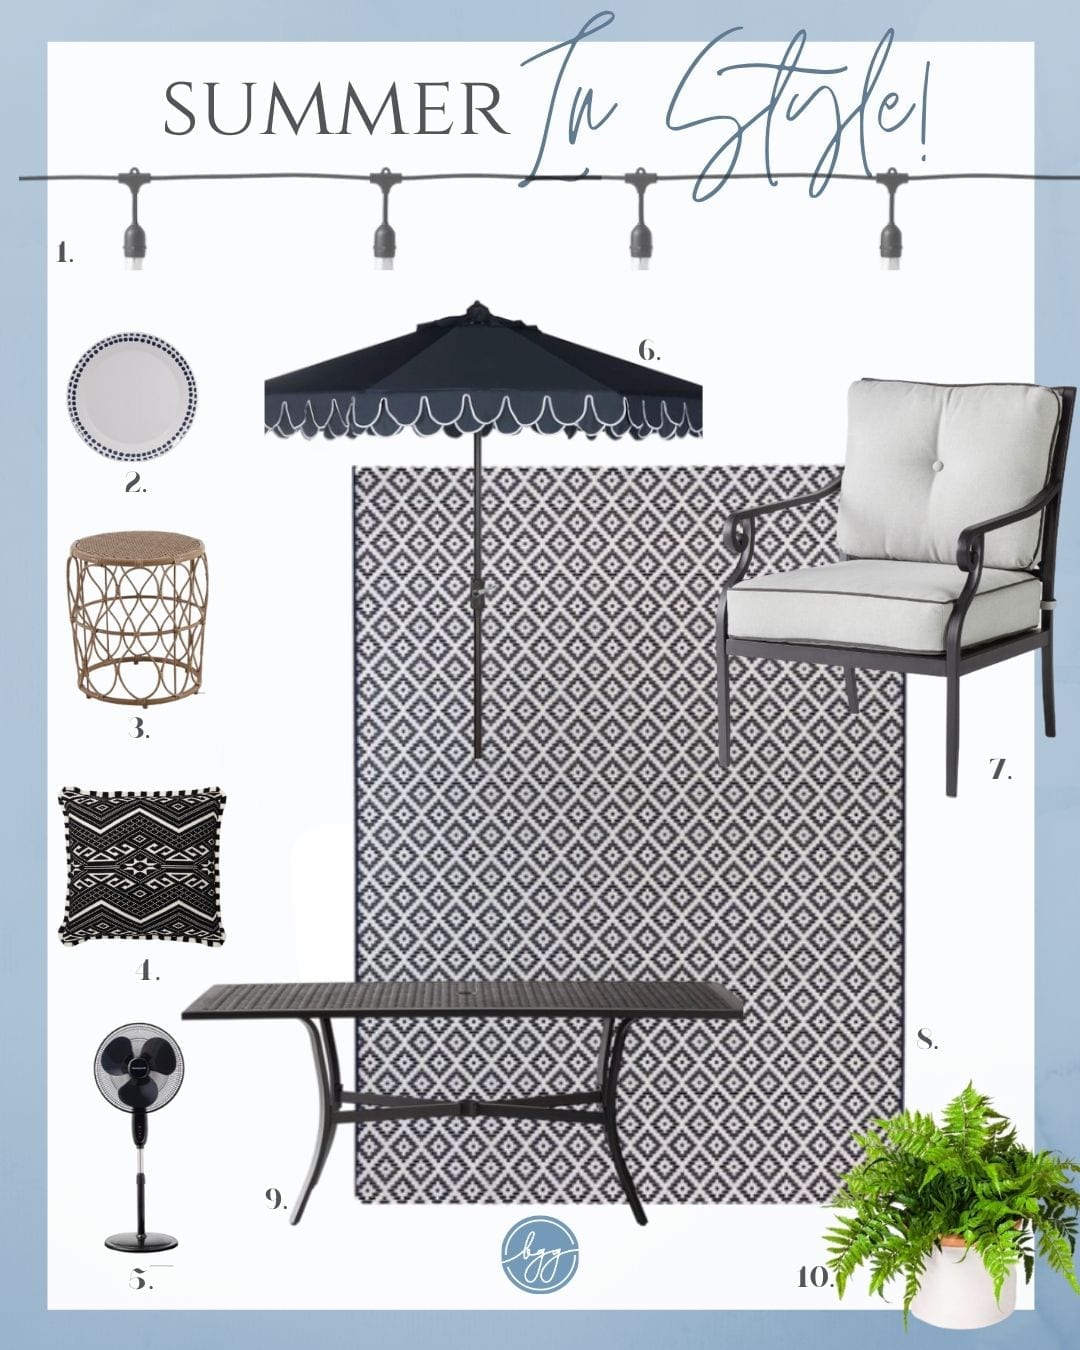 My top picks of the Target Outdoor Umbrella and This summer get outside and create a gorgeous oasis in your backyard! I rounded up some great Target patio furniture picks that will give you a very opulent outdoor look but for a great price! Included is one of my picks among Target Outdoor Rugs and a stunning Target Outdoor Rugs to create a gorgeous outdoor patio furniture setting in navy and white.